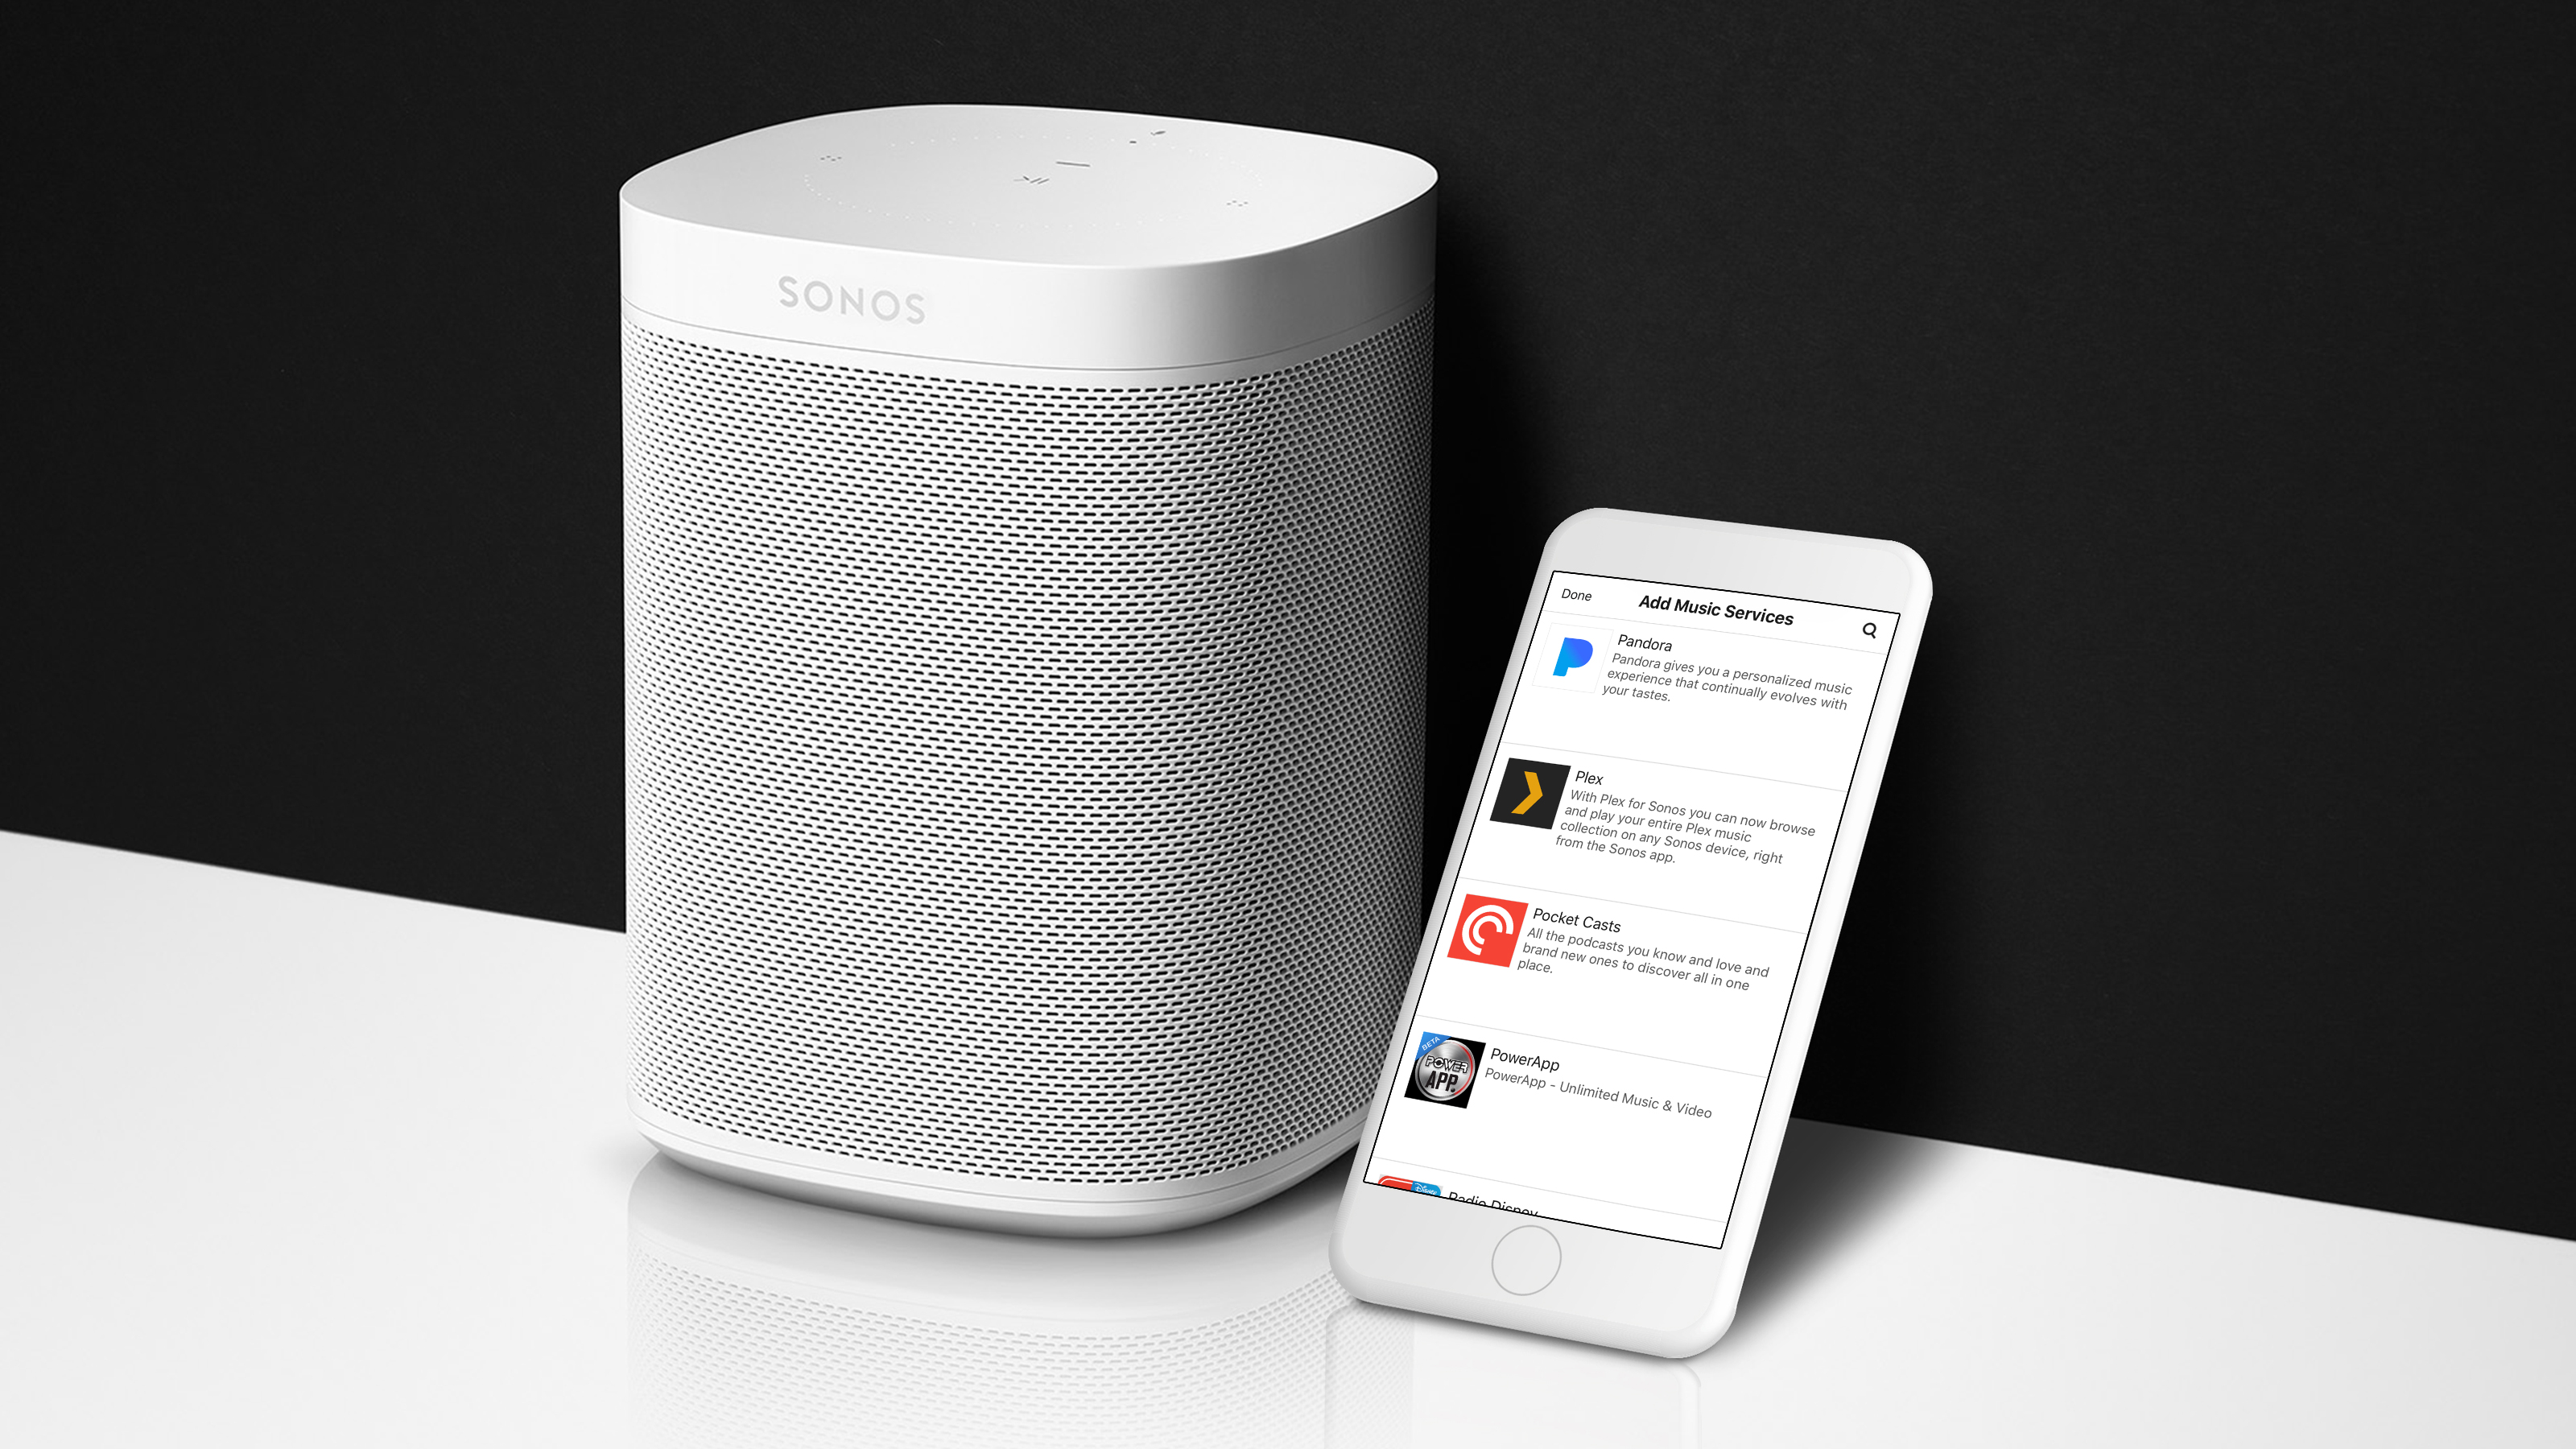 An image of the Sonos One speaker